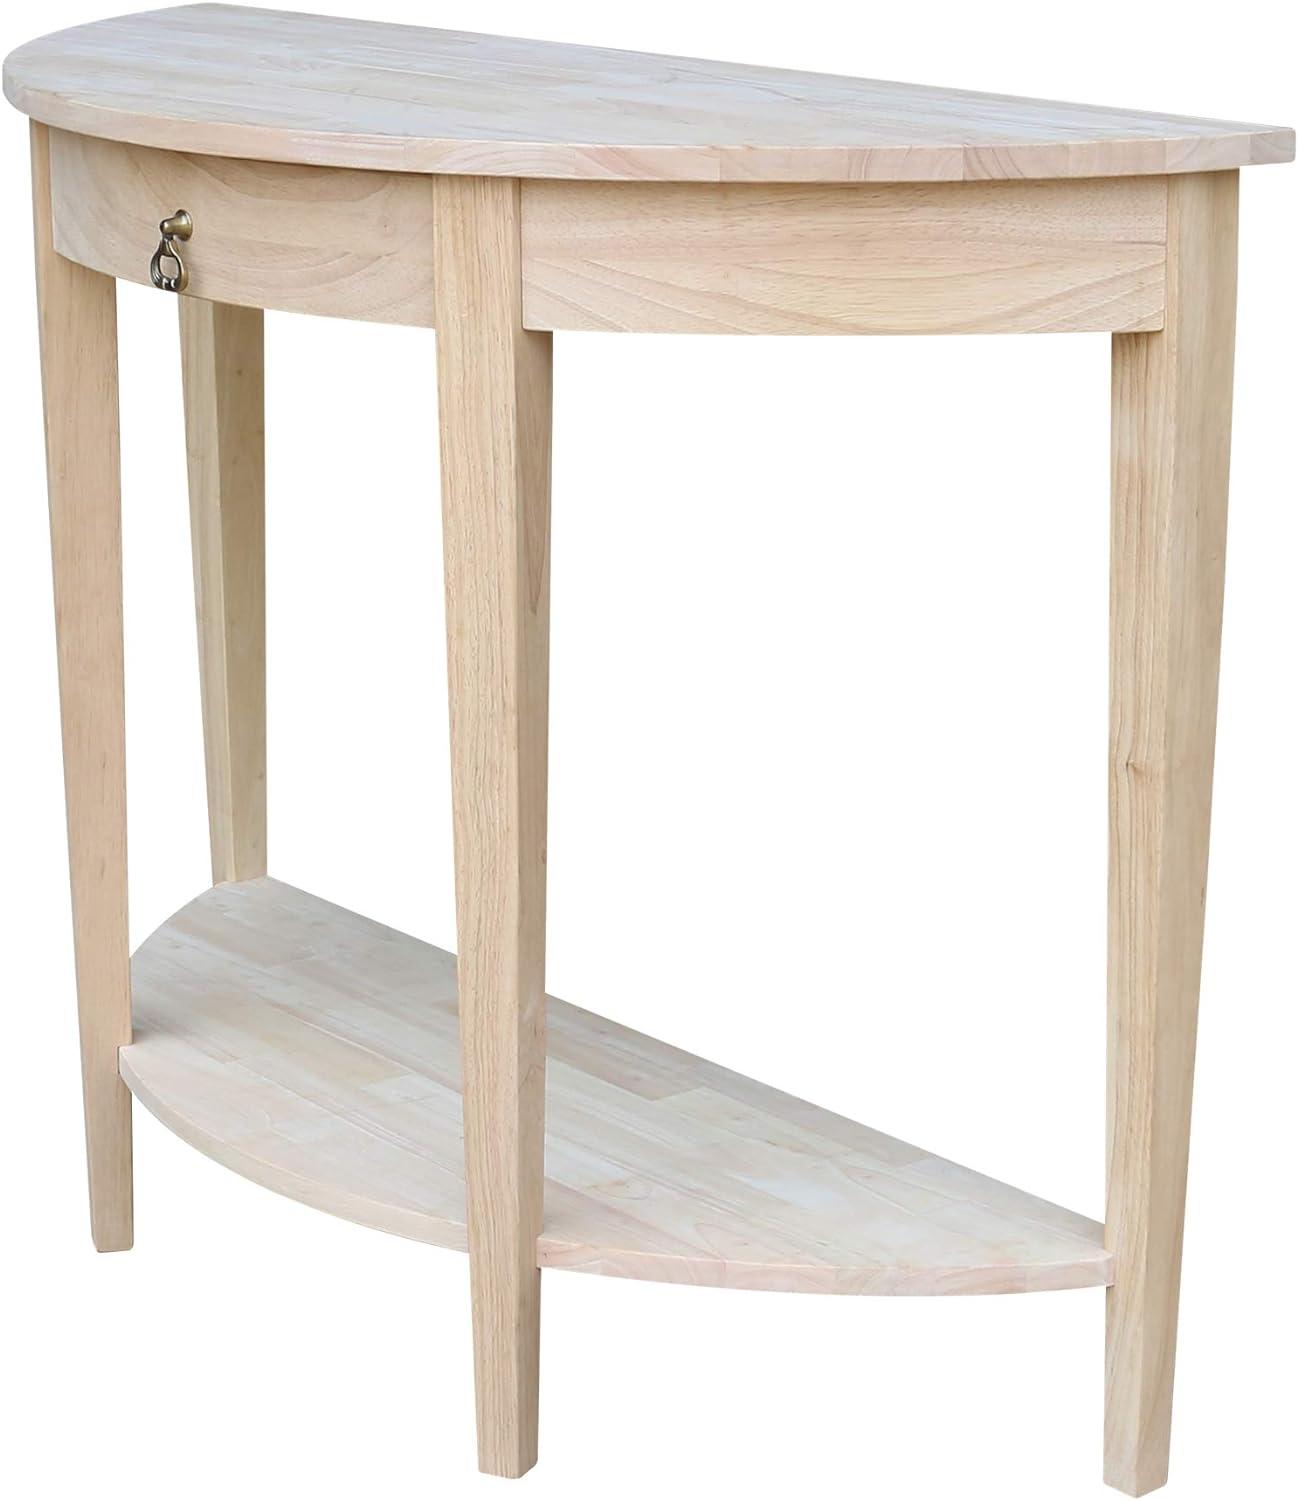 Elegant Unfinished Solid Wood Demilune Console Table with Storage